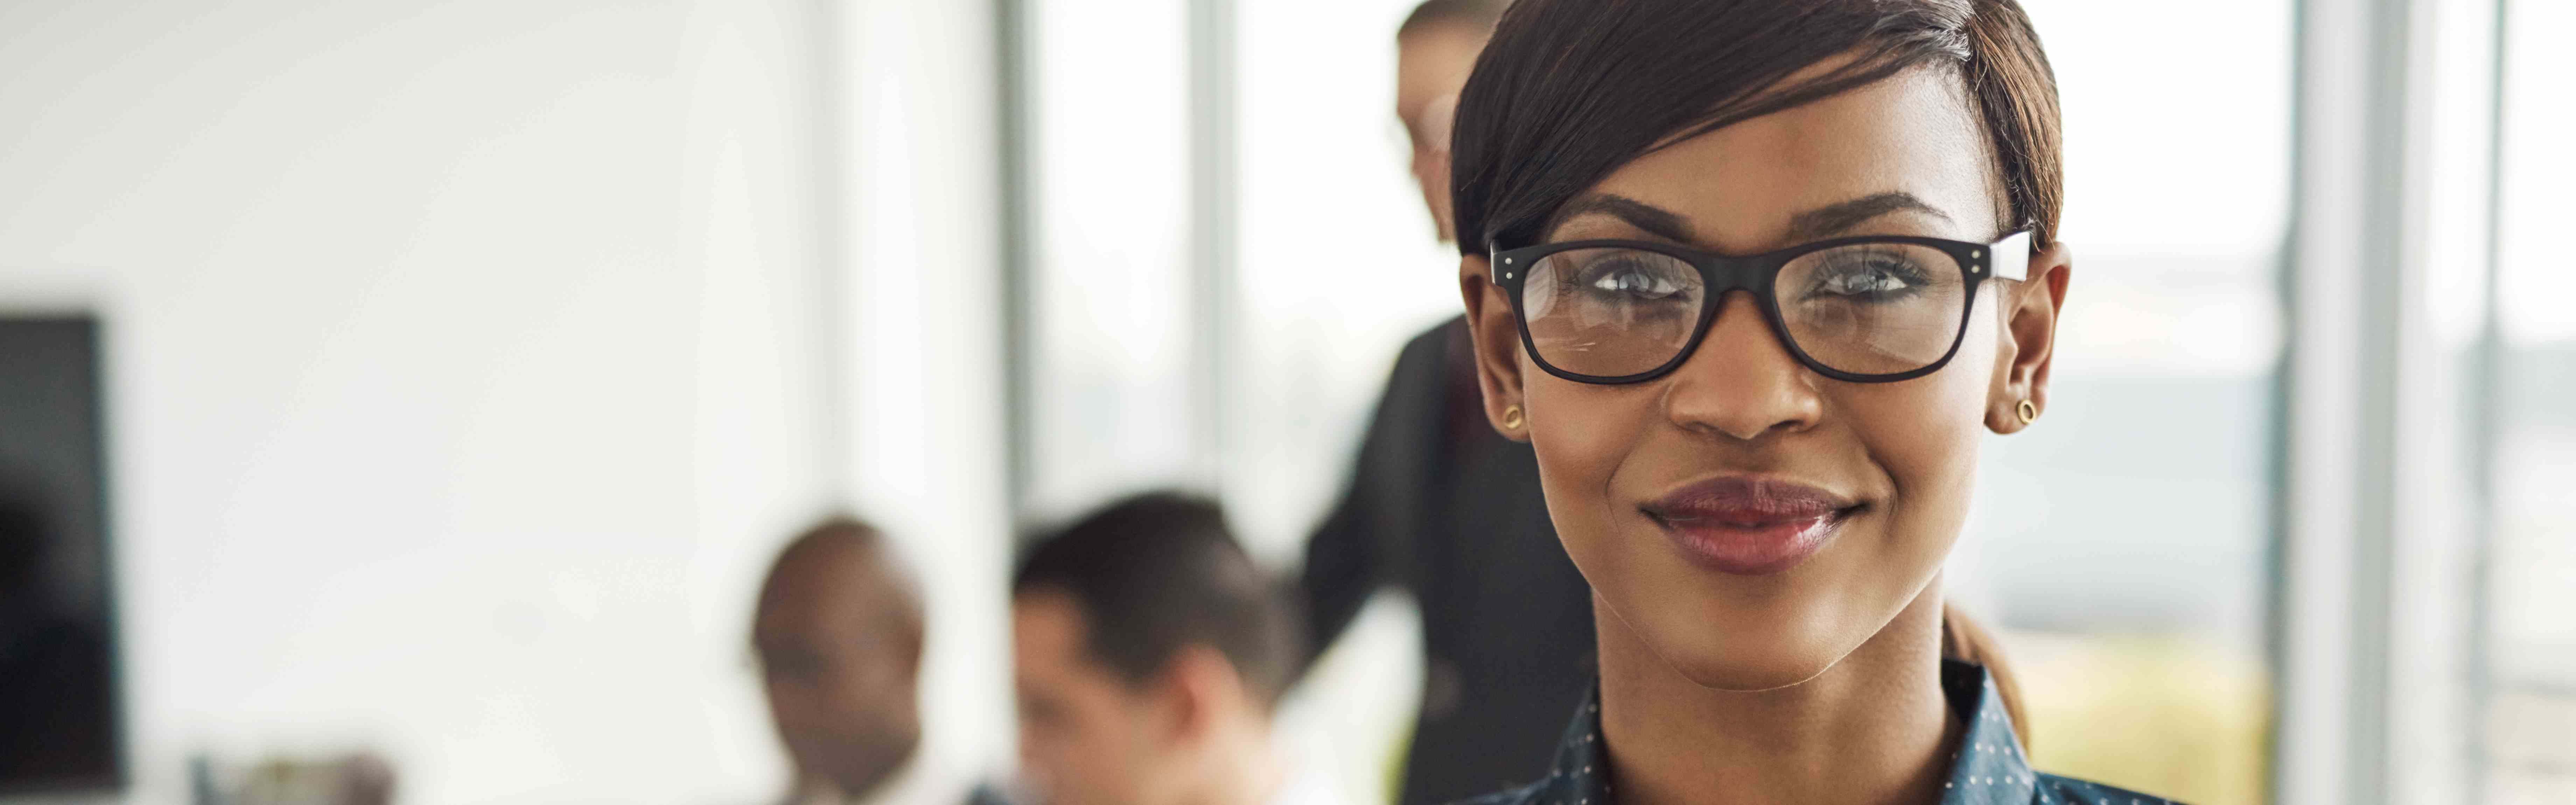 Beautiful young grinning professional Black woman in office with eyeglasses, folded arms and confident expression as other workers hold a meeting in background